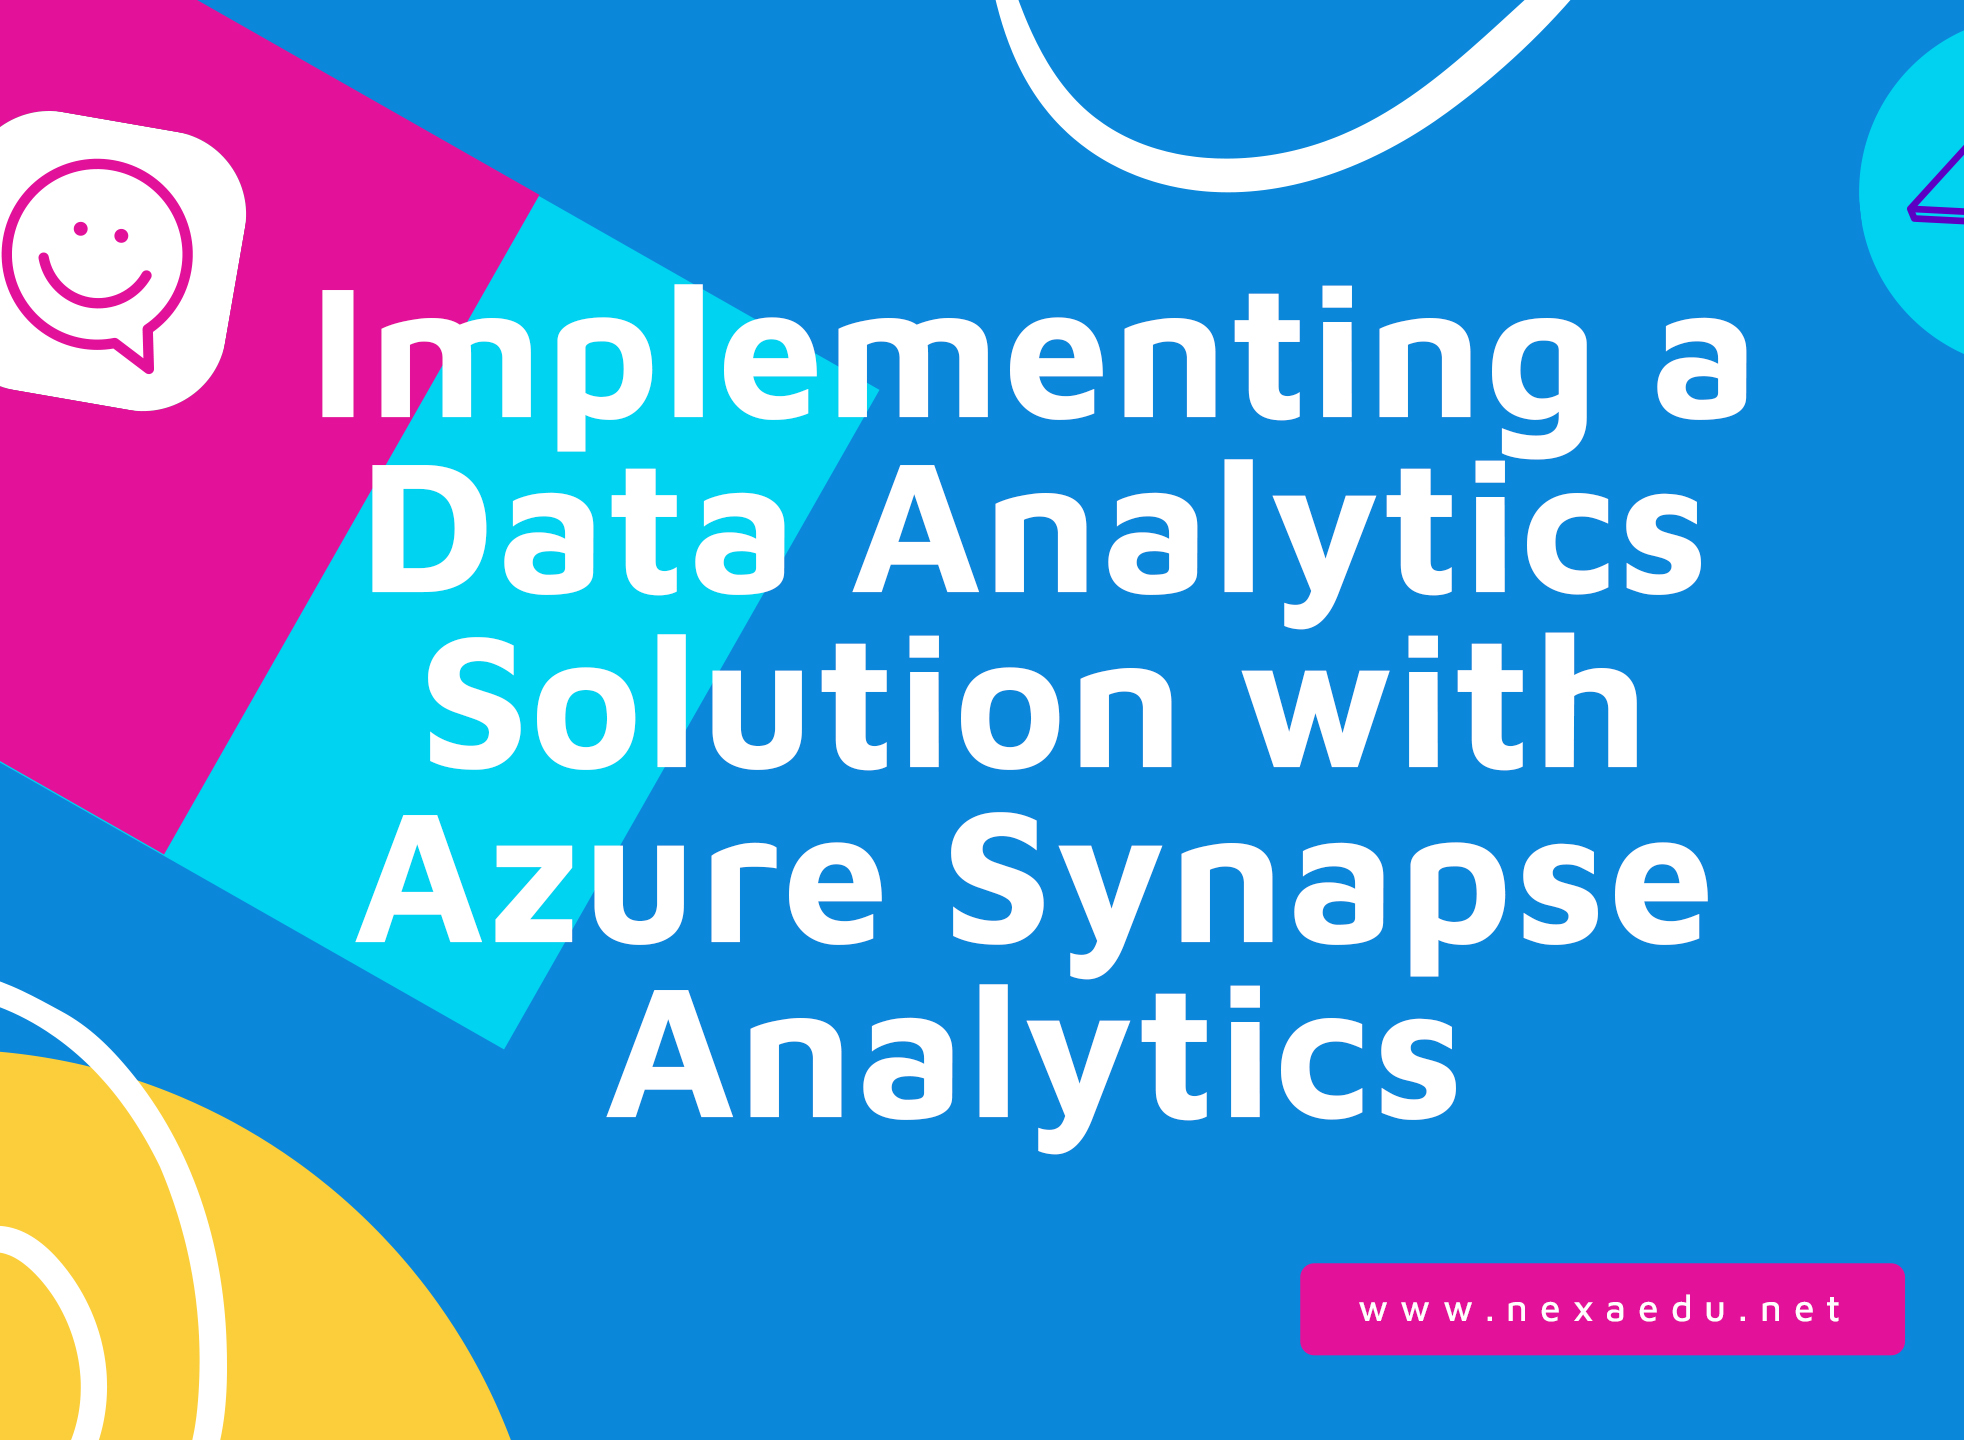 Implementing a Data Analytics Solution with Azure Synapse Analytics